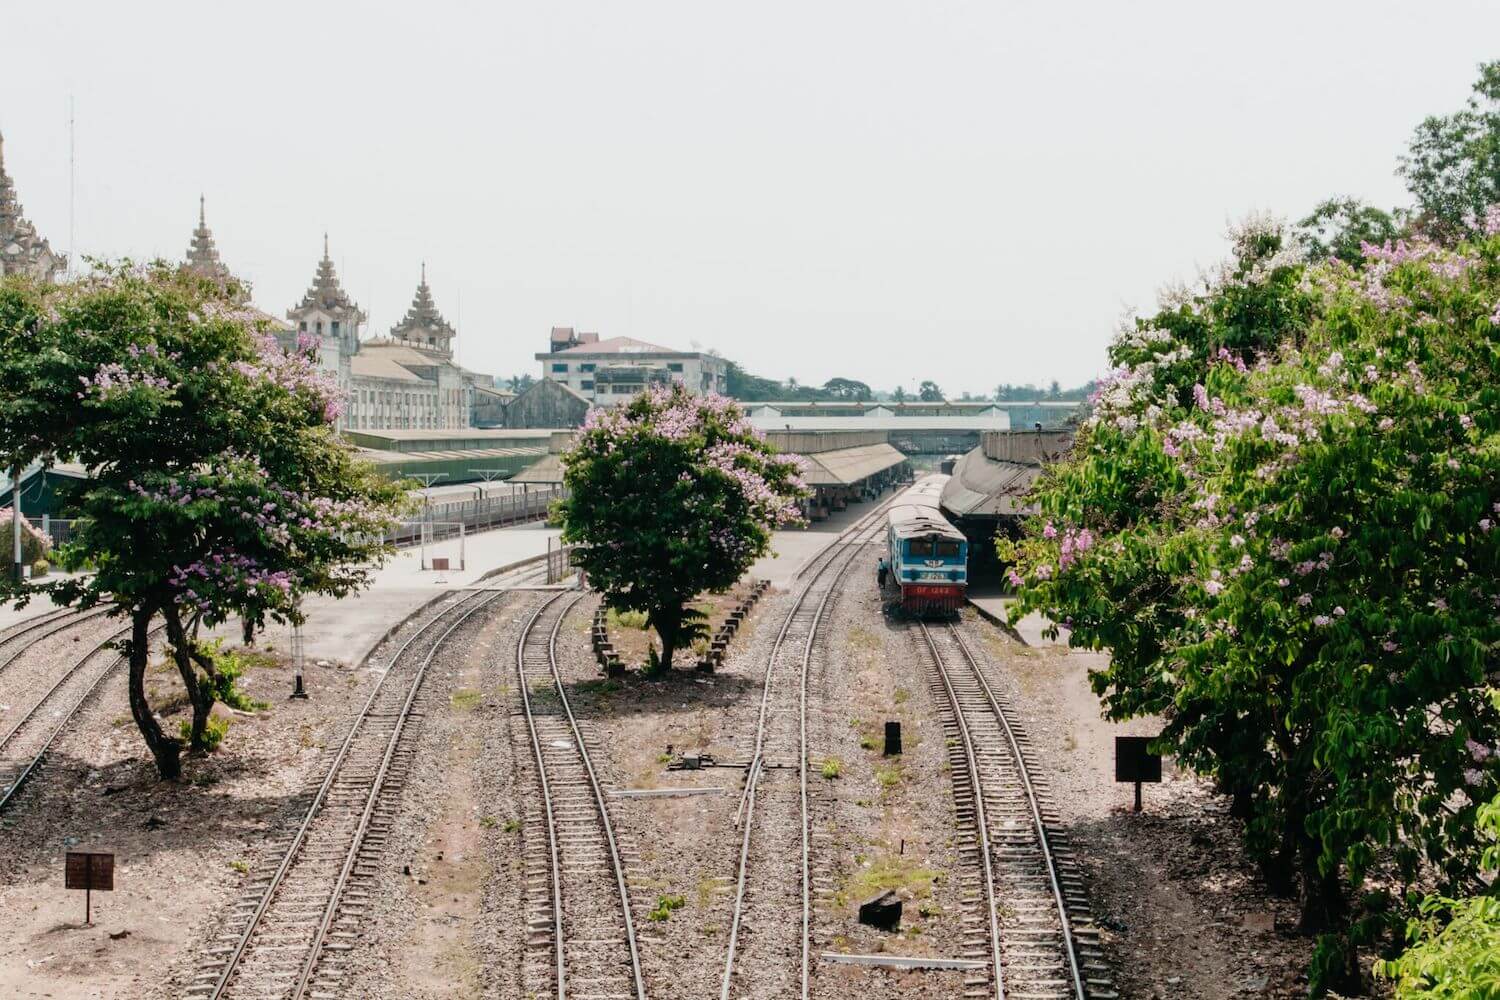 Best Myanmar Itinerary: Photo of Yangon train station, once capital of Burma, showing trees in bloom and old colonial buildings. Photo taken by Ryan Brown of Lost Boy Memoirs with Canon 650D Rebel T4i, edited in Adobe Lightroom.